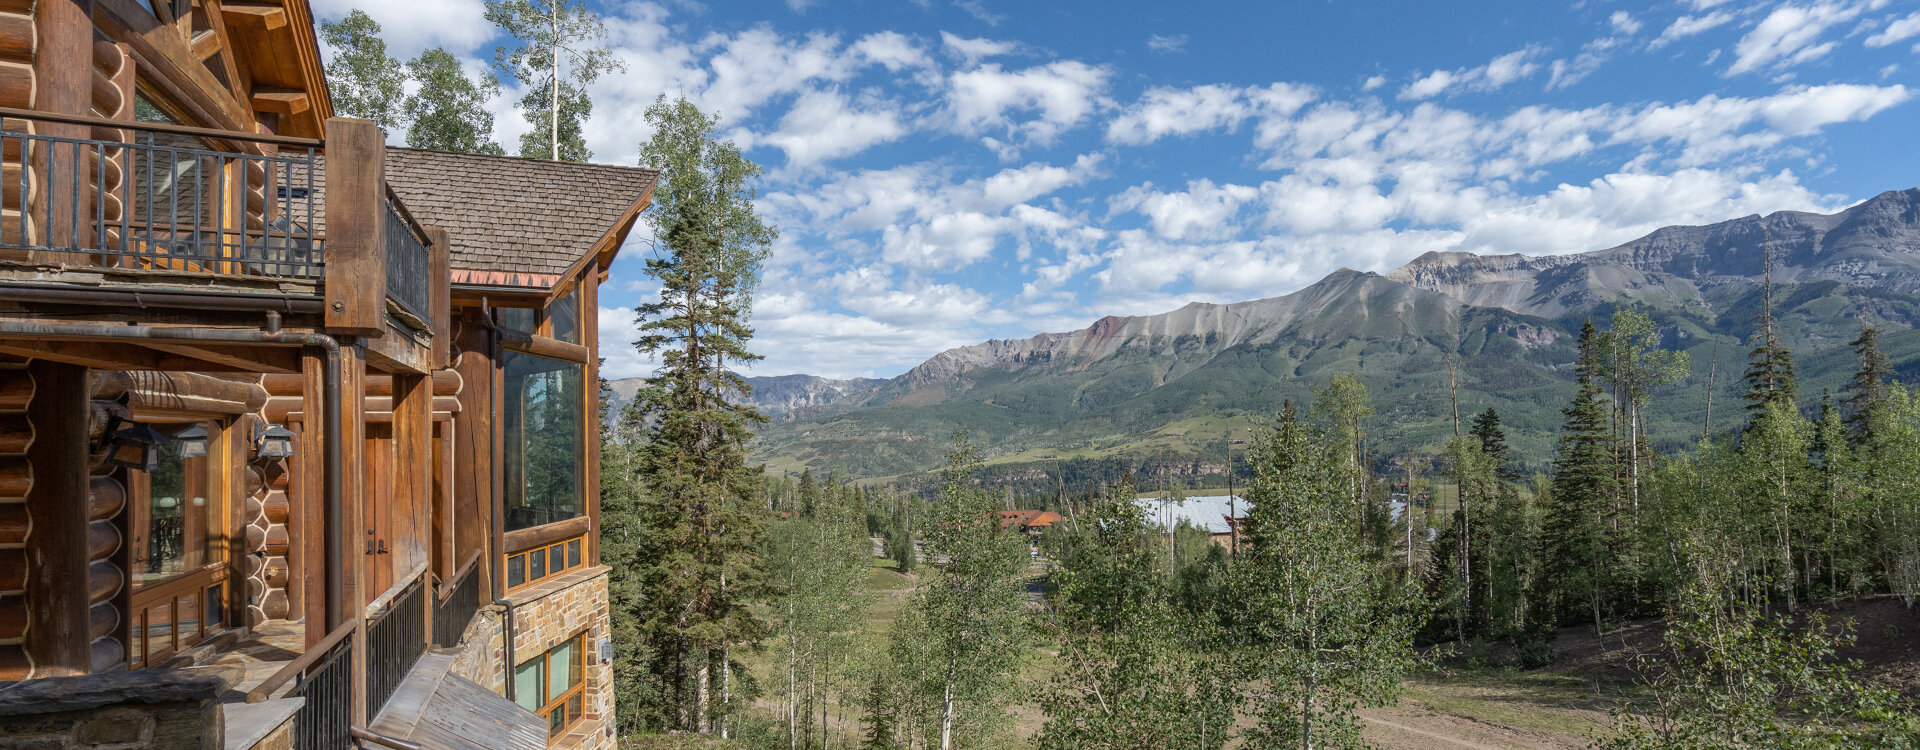 1.03-telluride-picture-perfect-exterior-back-view